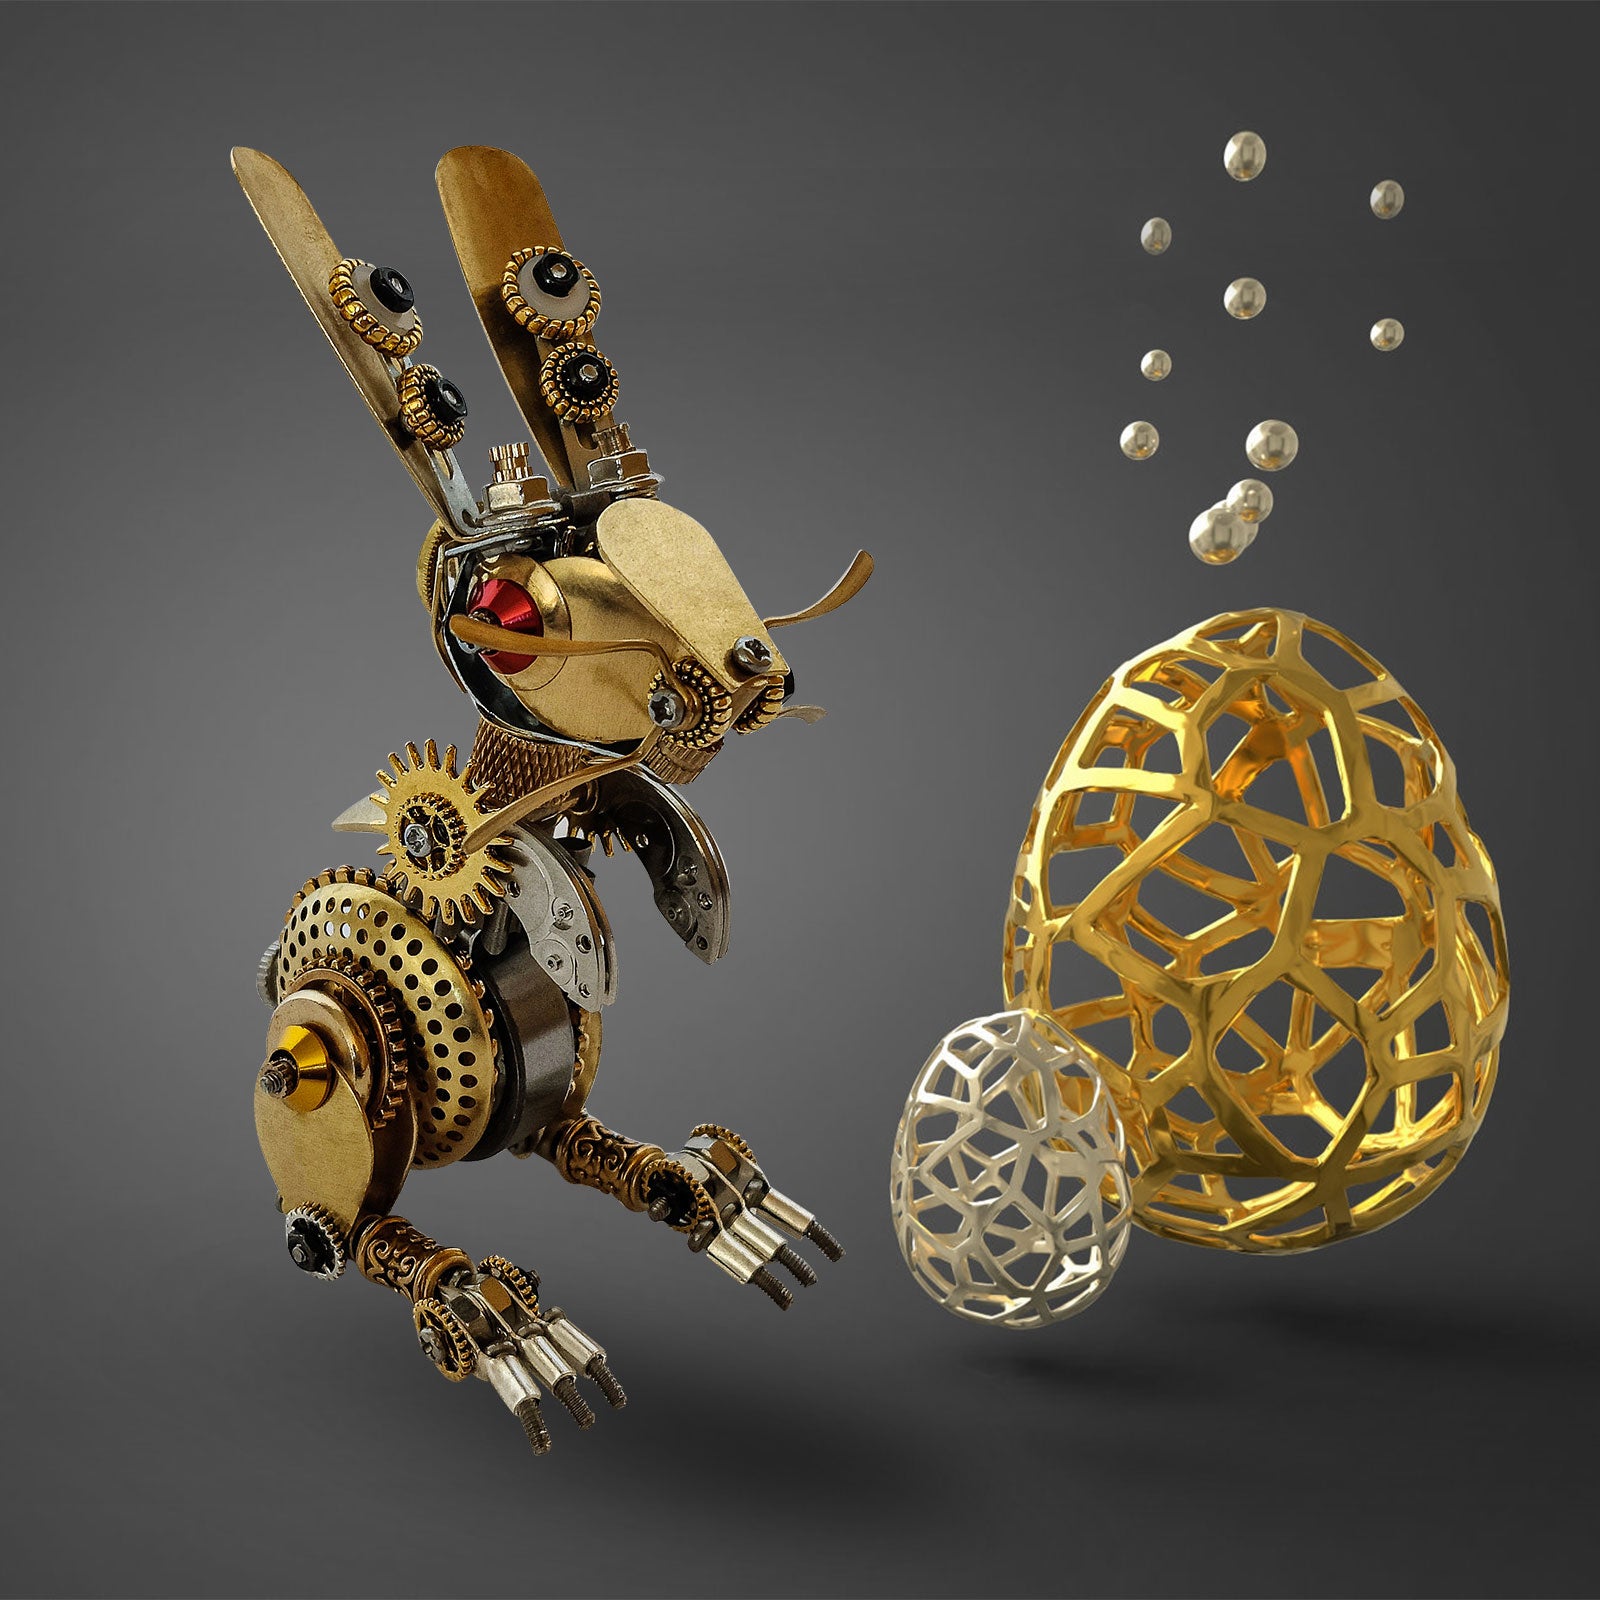 Steampunk Easter Bunny Egg Model Metal Assembly Kits